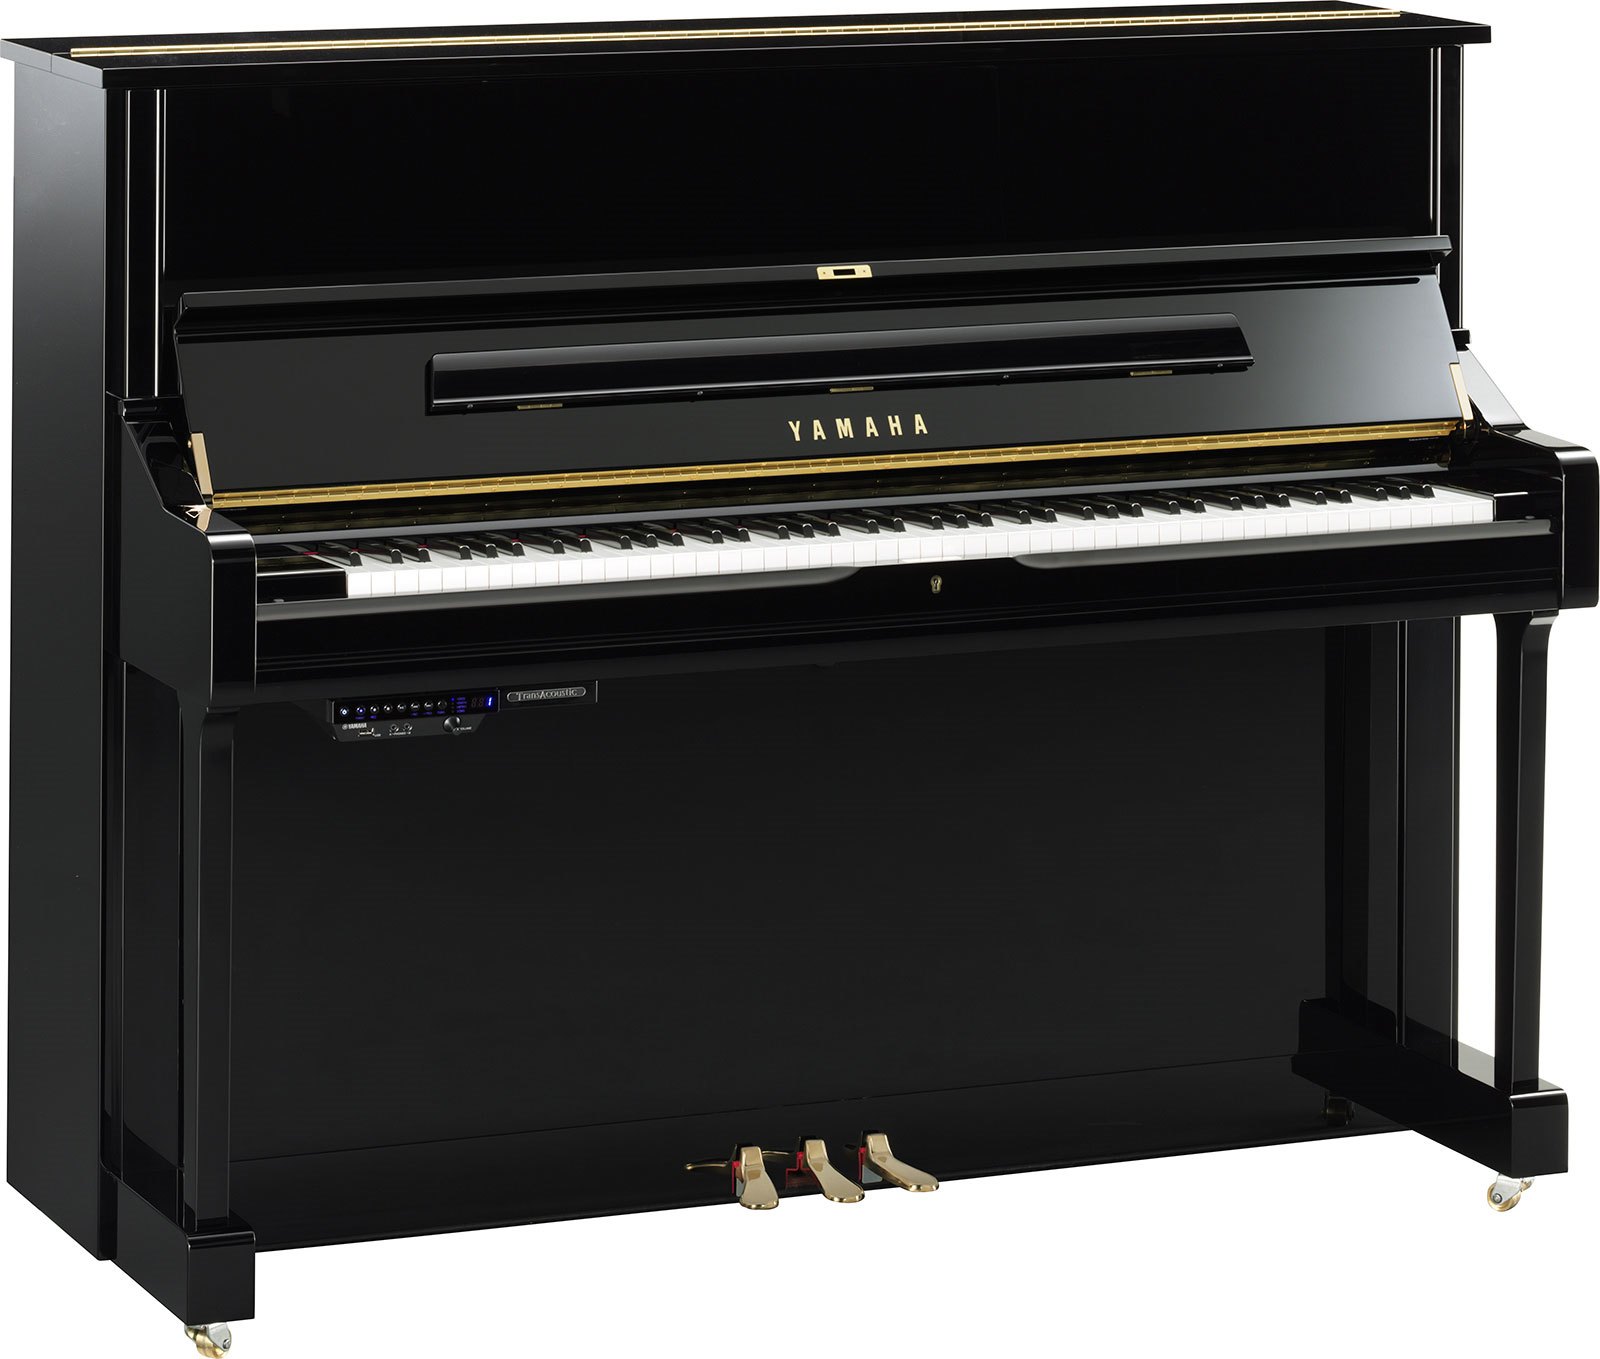 Accidental Ver insectos Inmundicia U1TA - Overview - TransAcoustic™ Piano - Pianos - Musical Instruments -  Products - Yamaha - United States